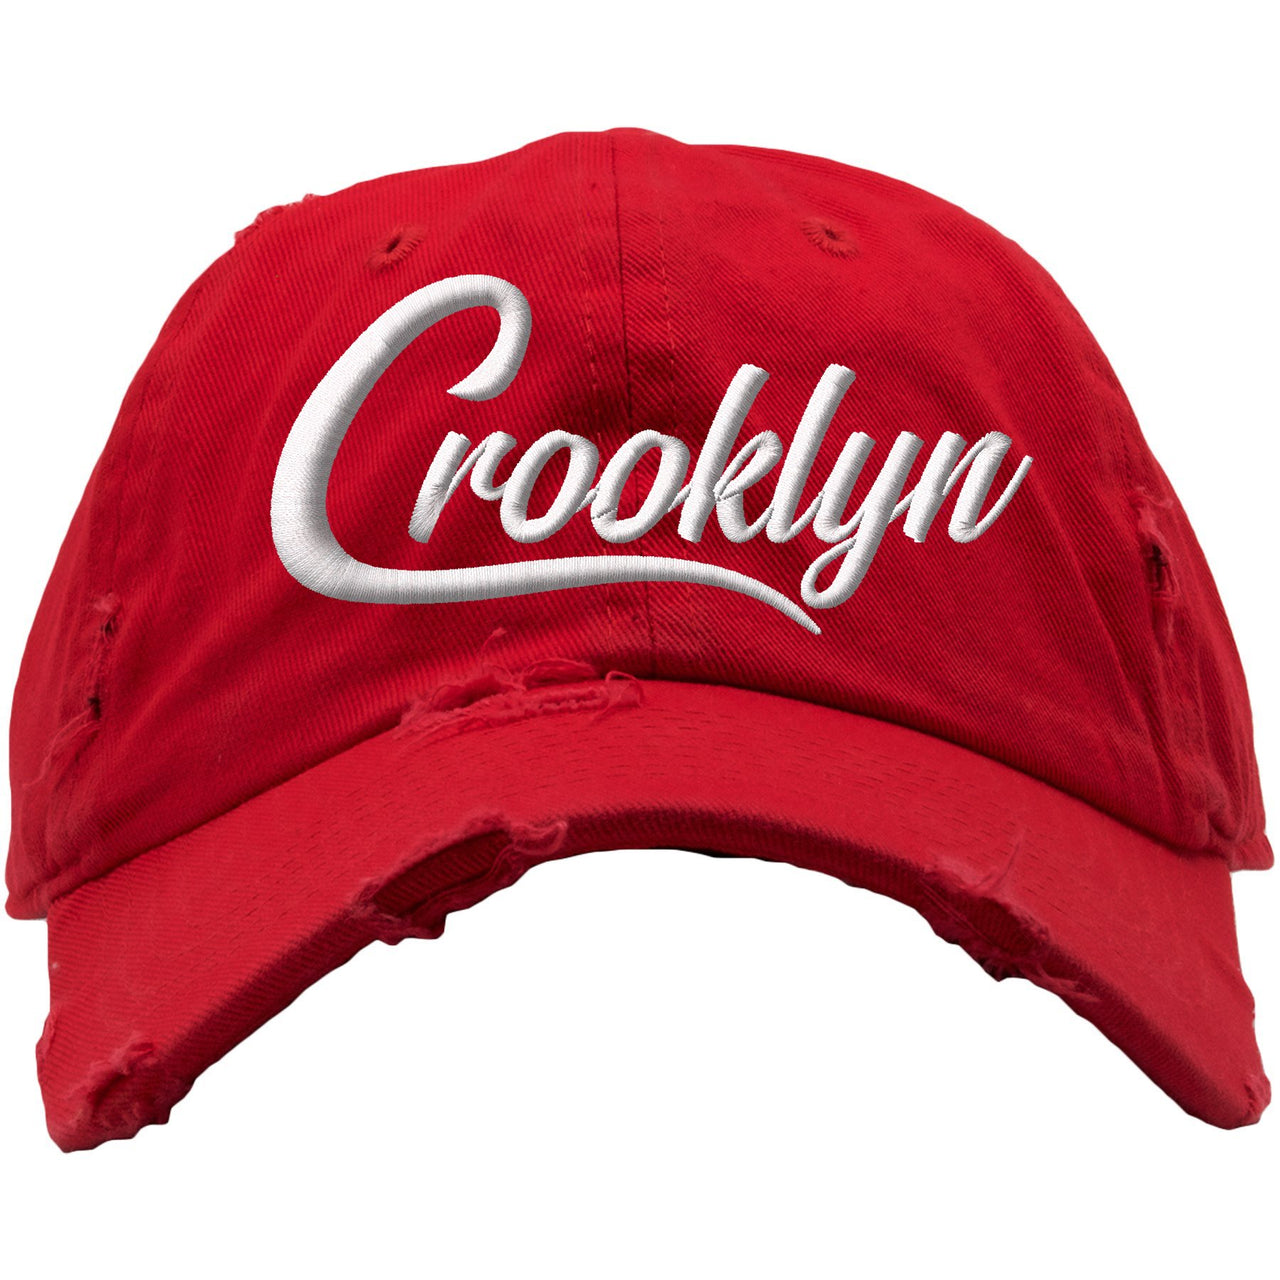 White University Red Pluses Distressed Dad Hat | Crooklyn, Red